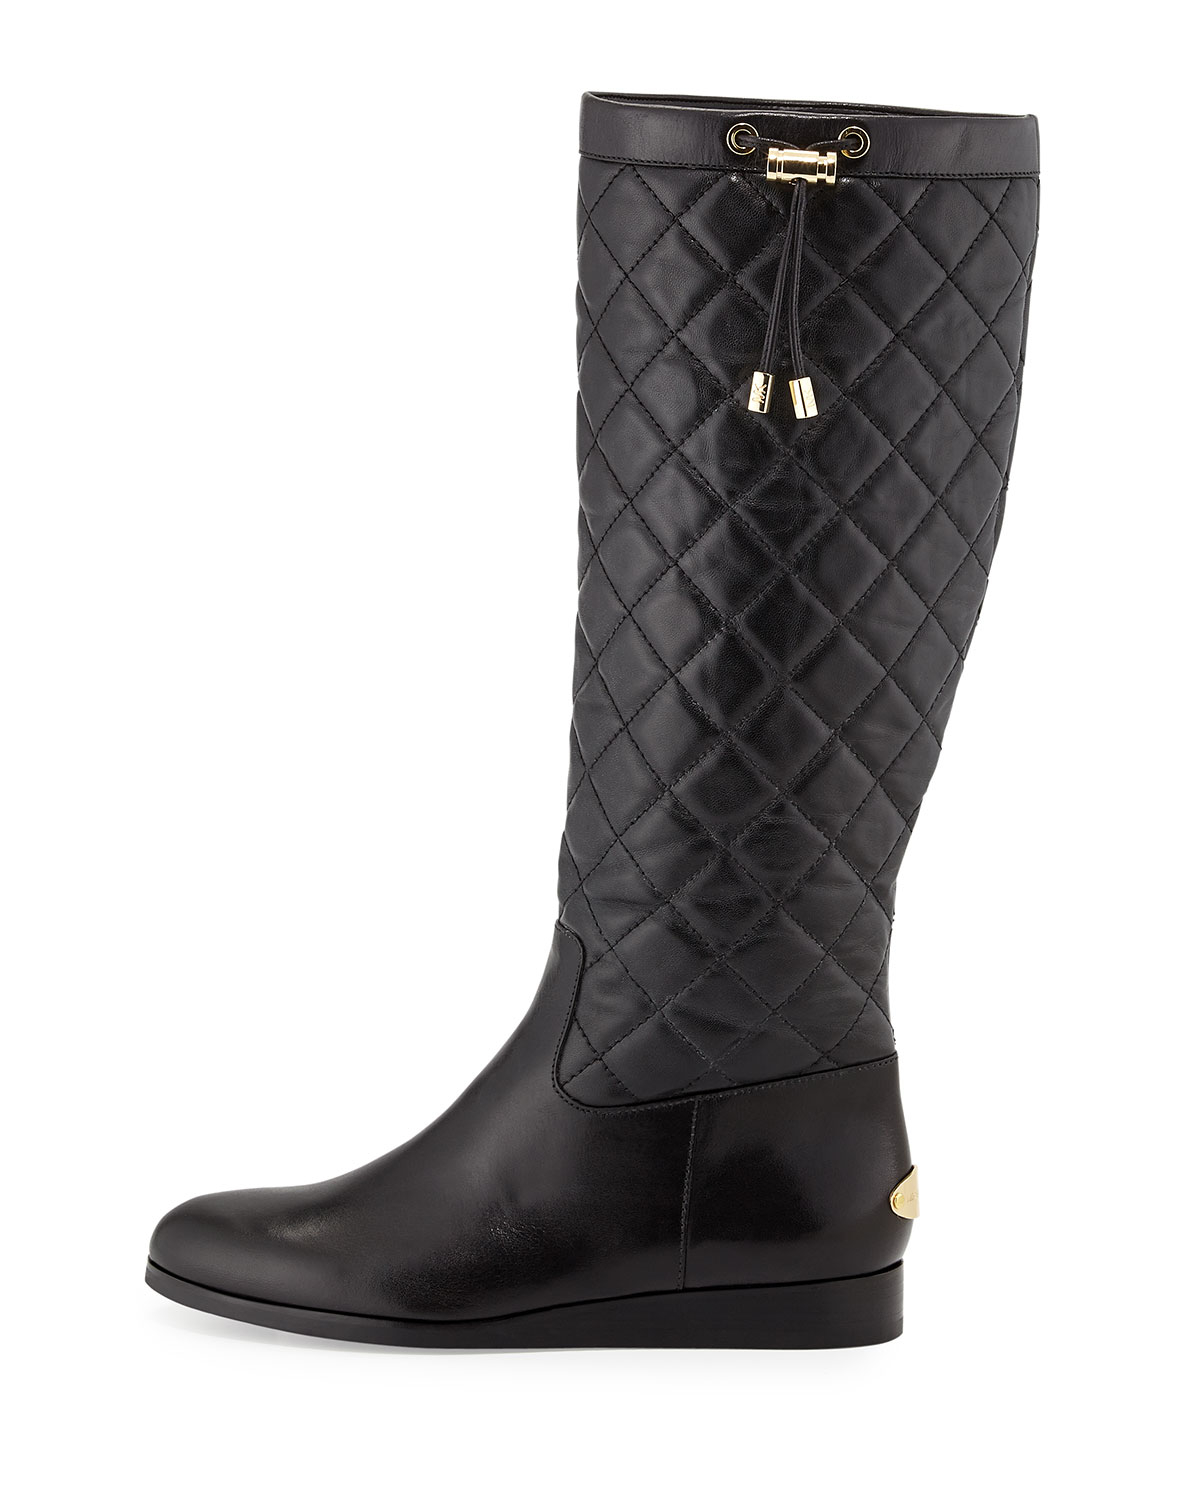 Lyst - Michael michael kors Lizzie Quilted Leather Knee Boot in Black